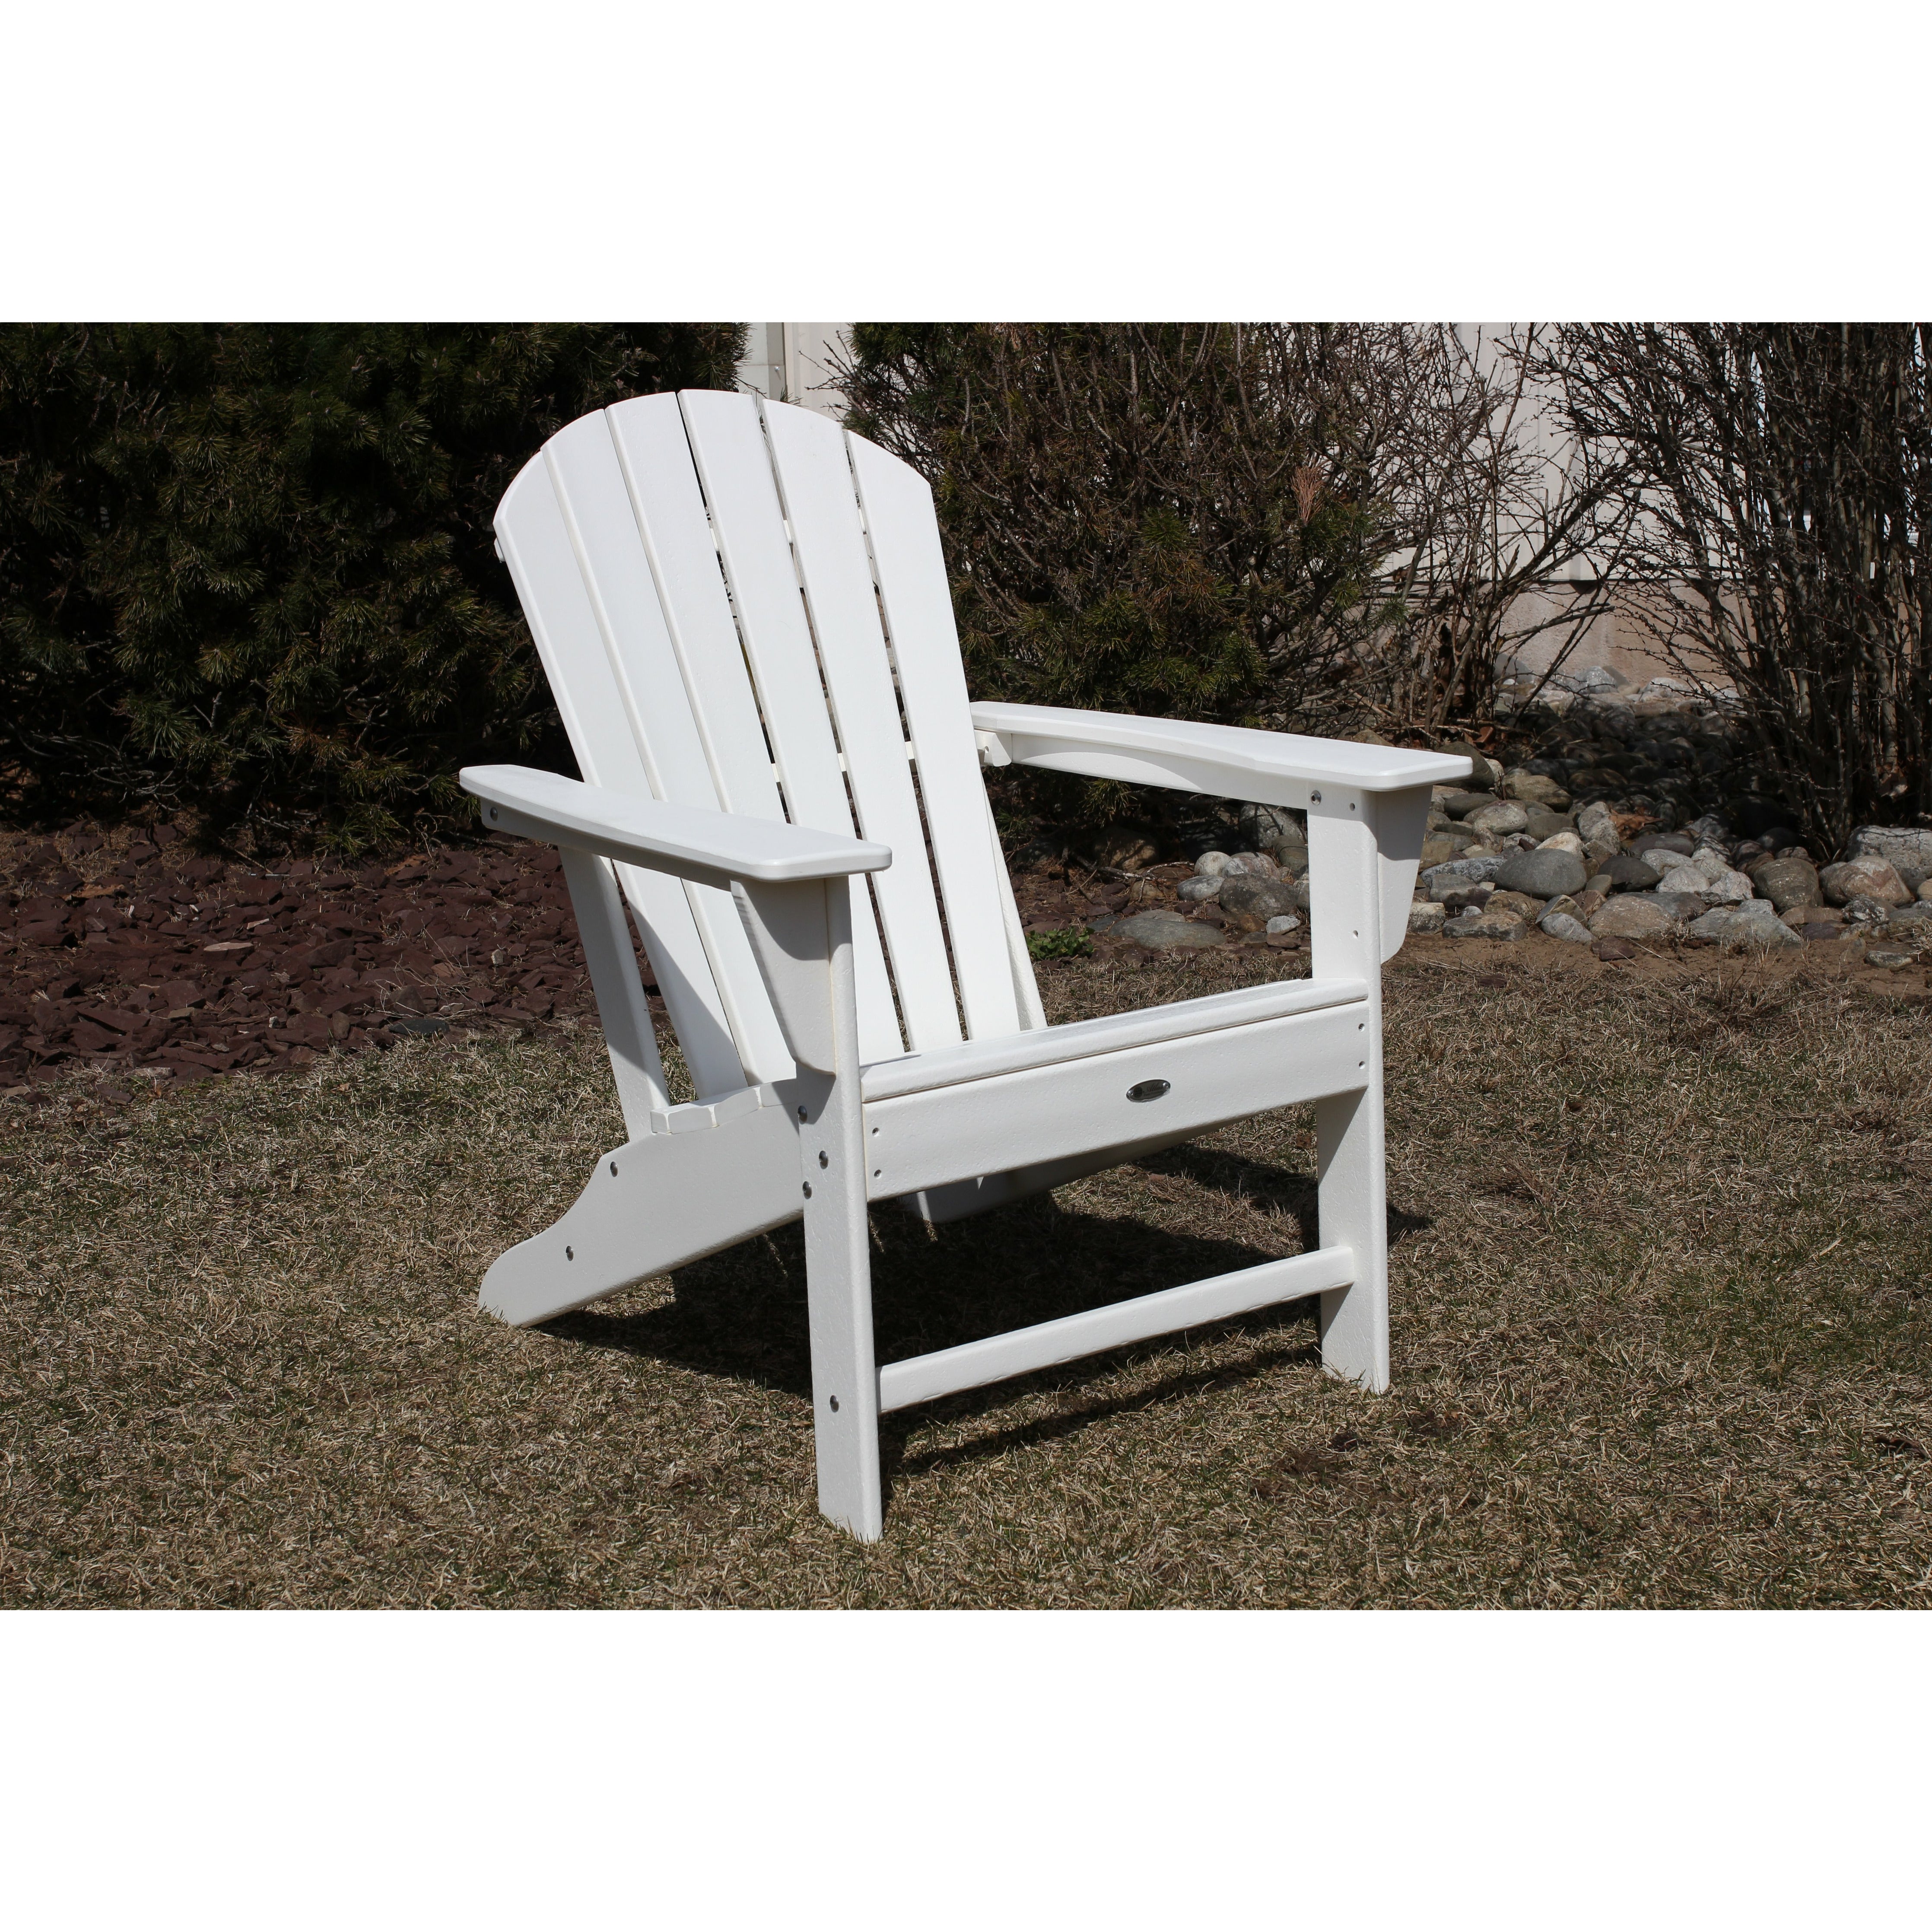 Surf City Adirondack Chair (White) - Polymer Furniture IN STOCK